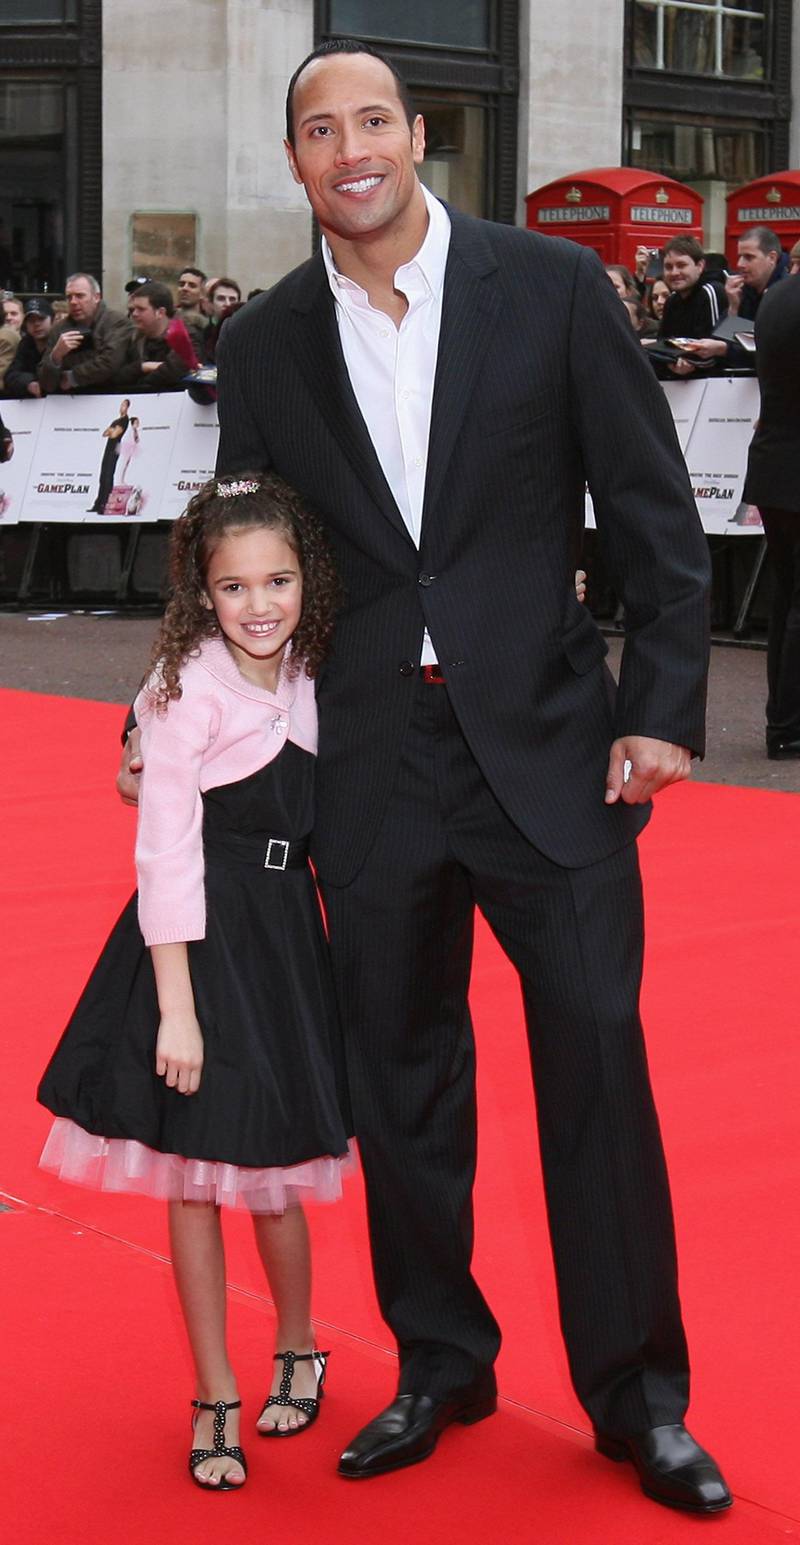 LONDON - MARCH 02:  Dwayne 'The Rock' Johnson and Madison Pettis arrive at the premier of The Game Plan at the Odeon West End, Leicester Square on March 02, 2008 in London, England.  (Photo by Dan Kitwood/Getty Images)